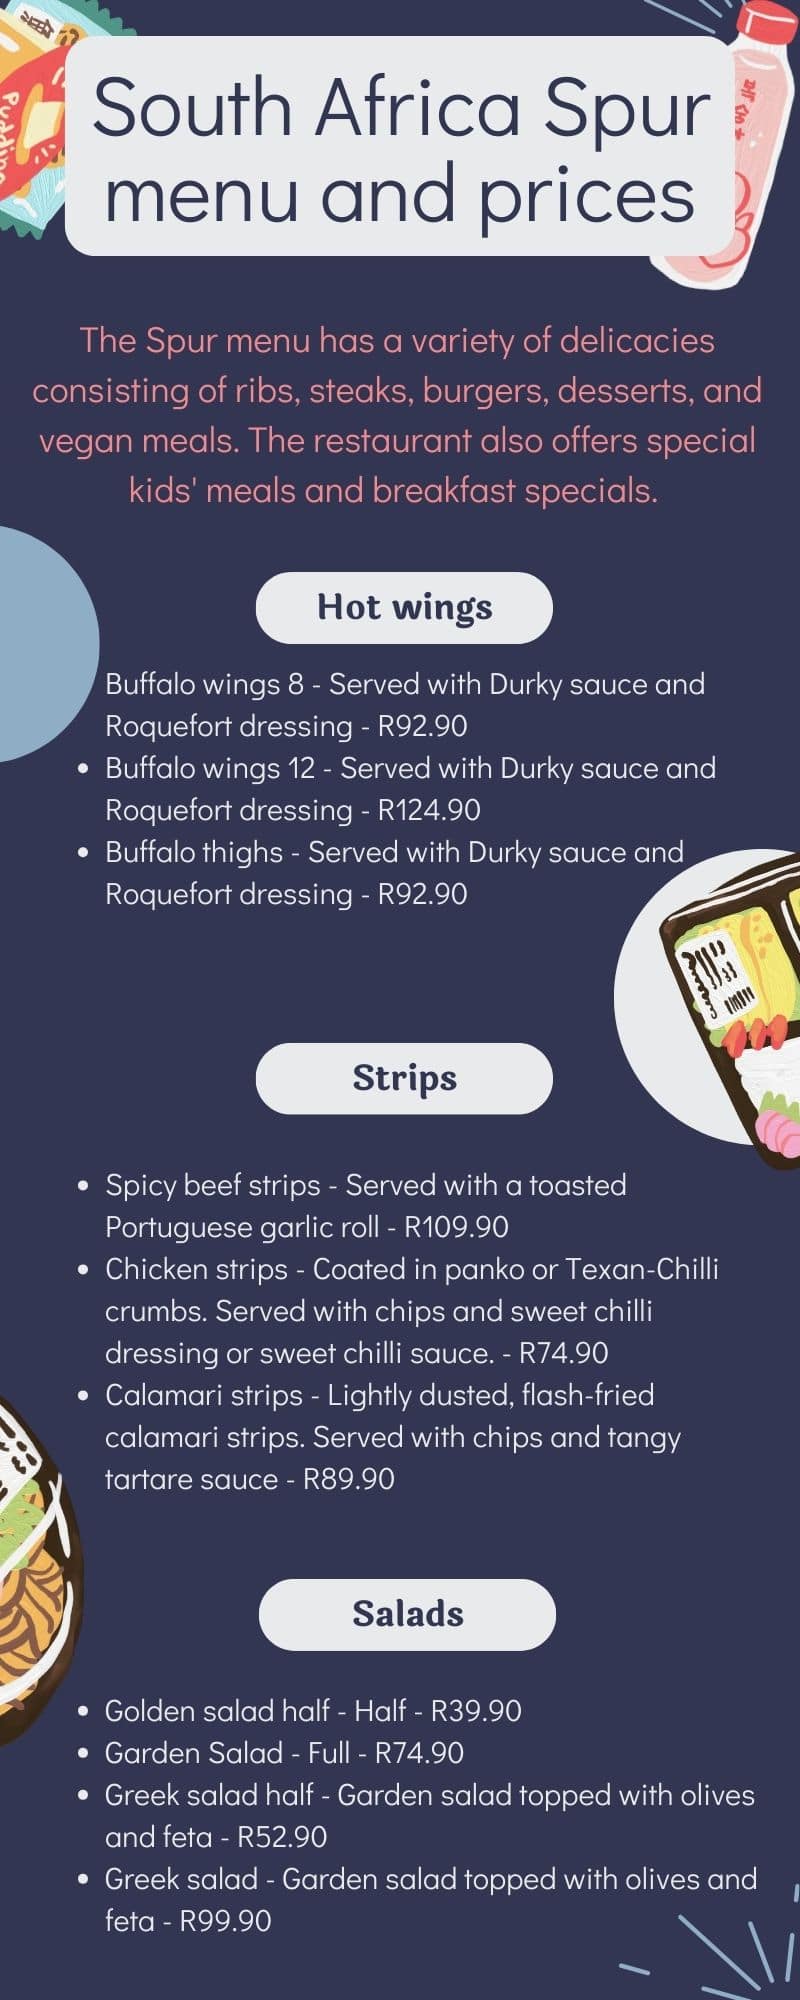 South Africa Spur menu and prices